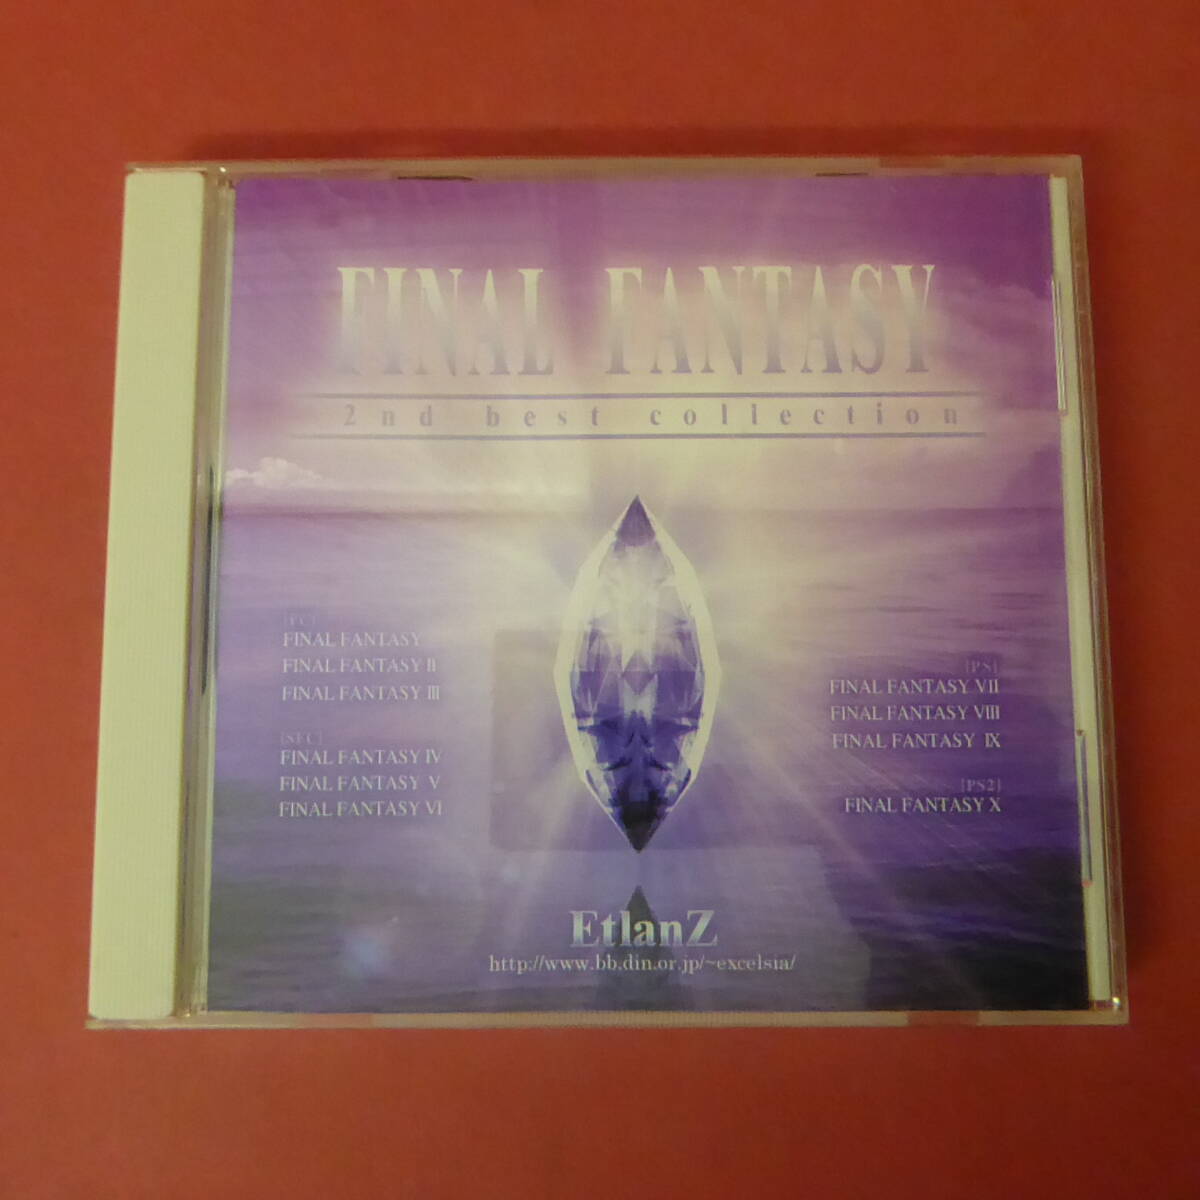 CD1-240227*FINAL FANTASY 2nd best collection CD